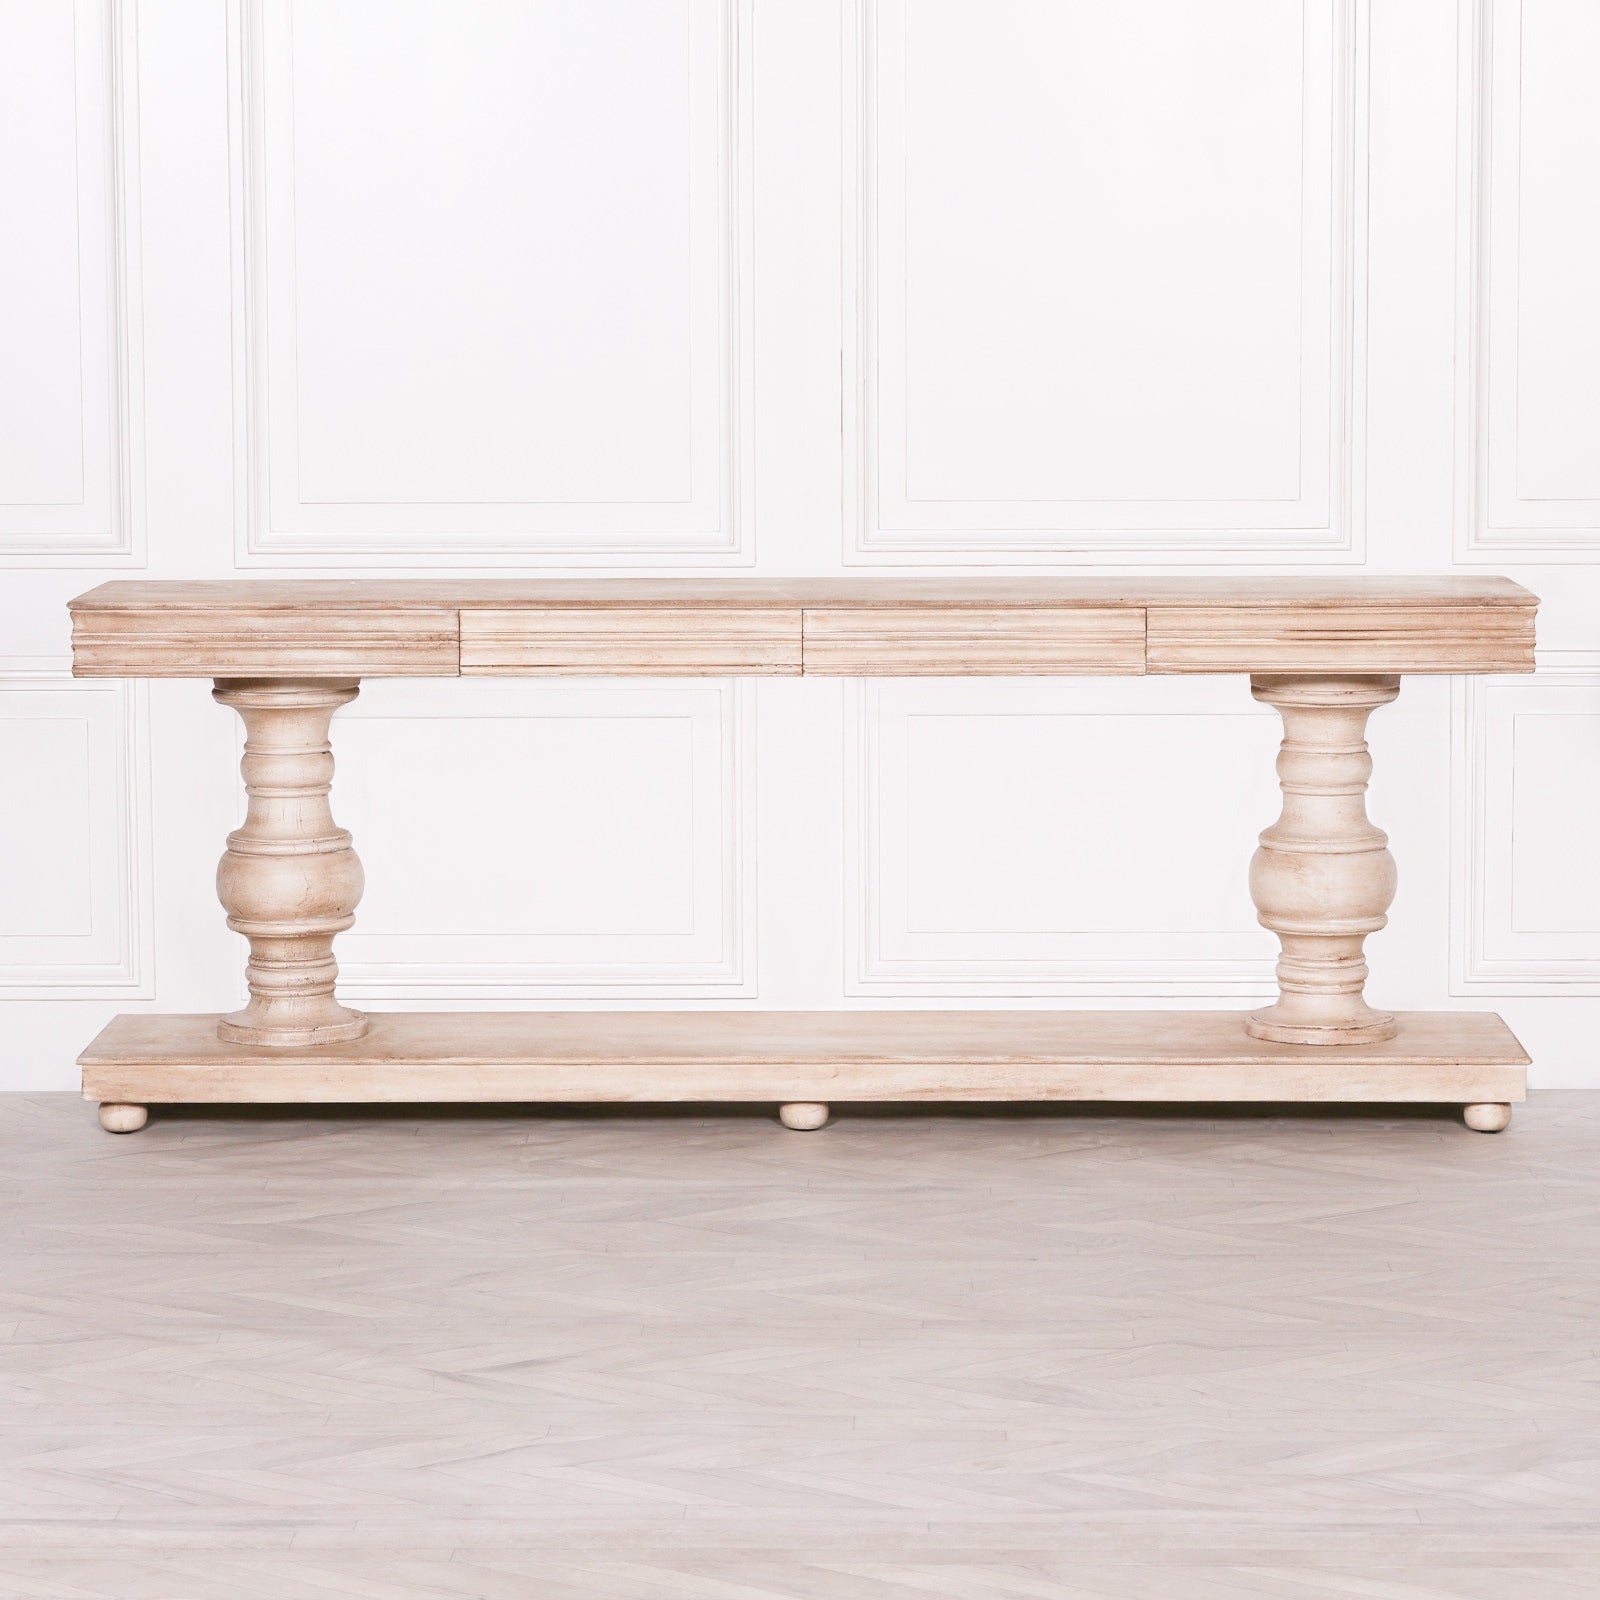 Wooden Console Table with Drawers